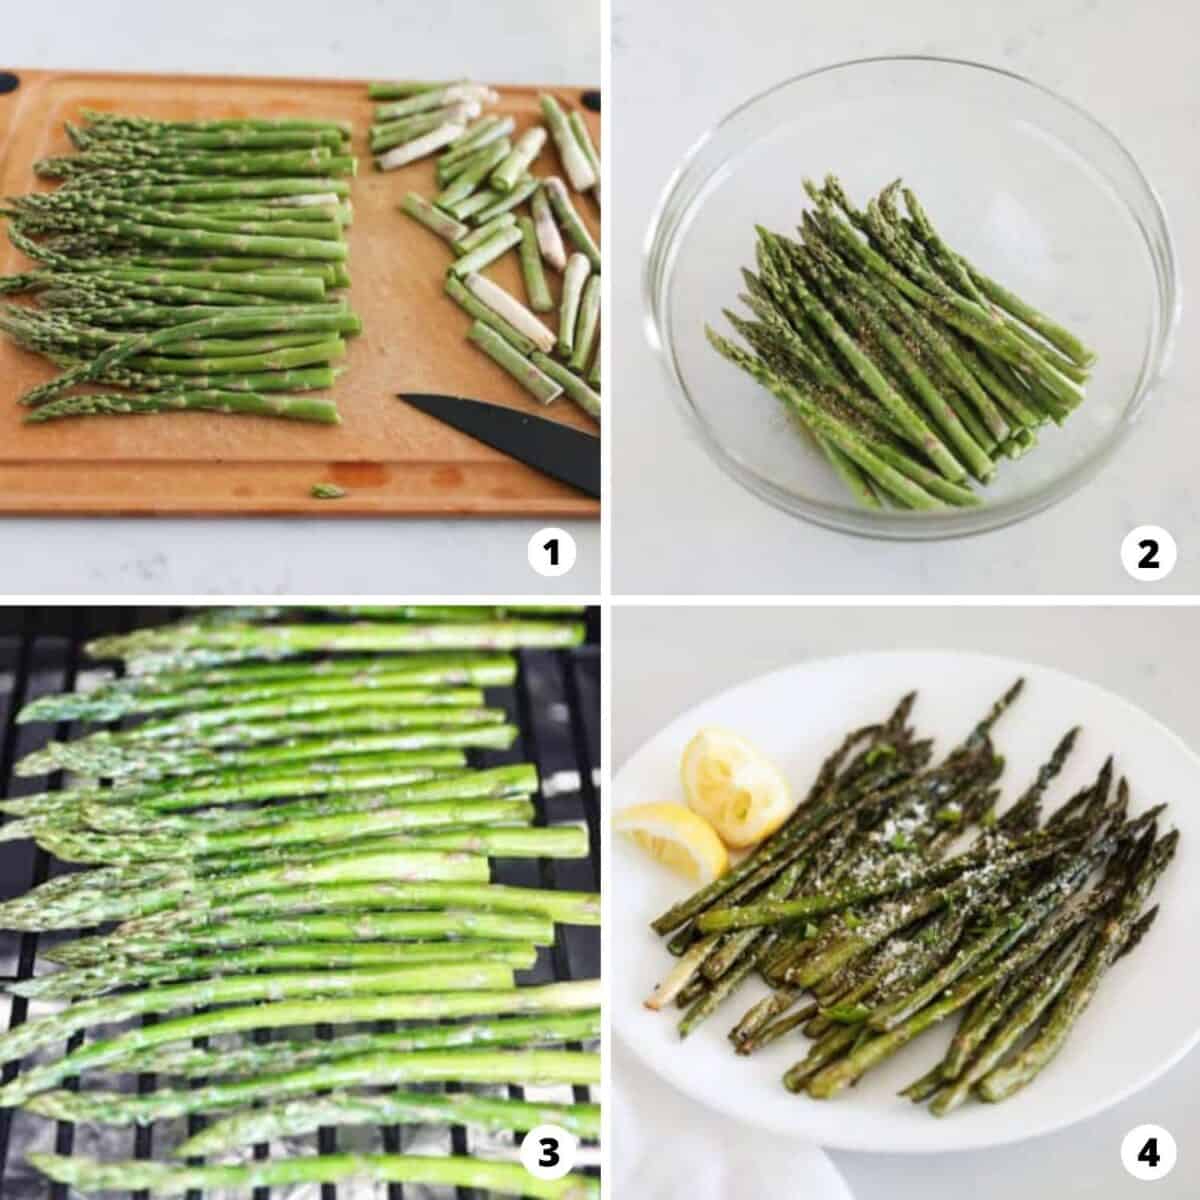 The process of making grilled asparagus in a four step photo collage.